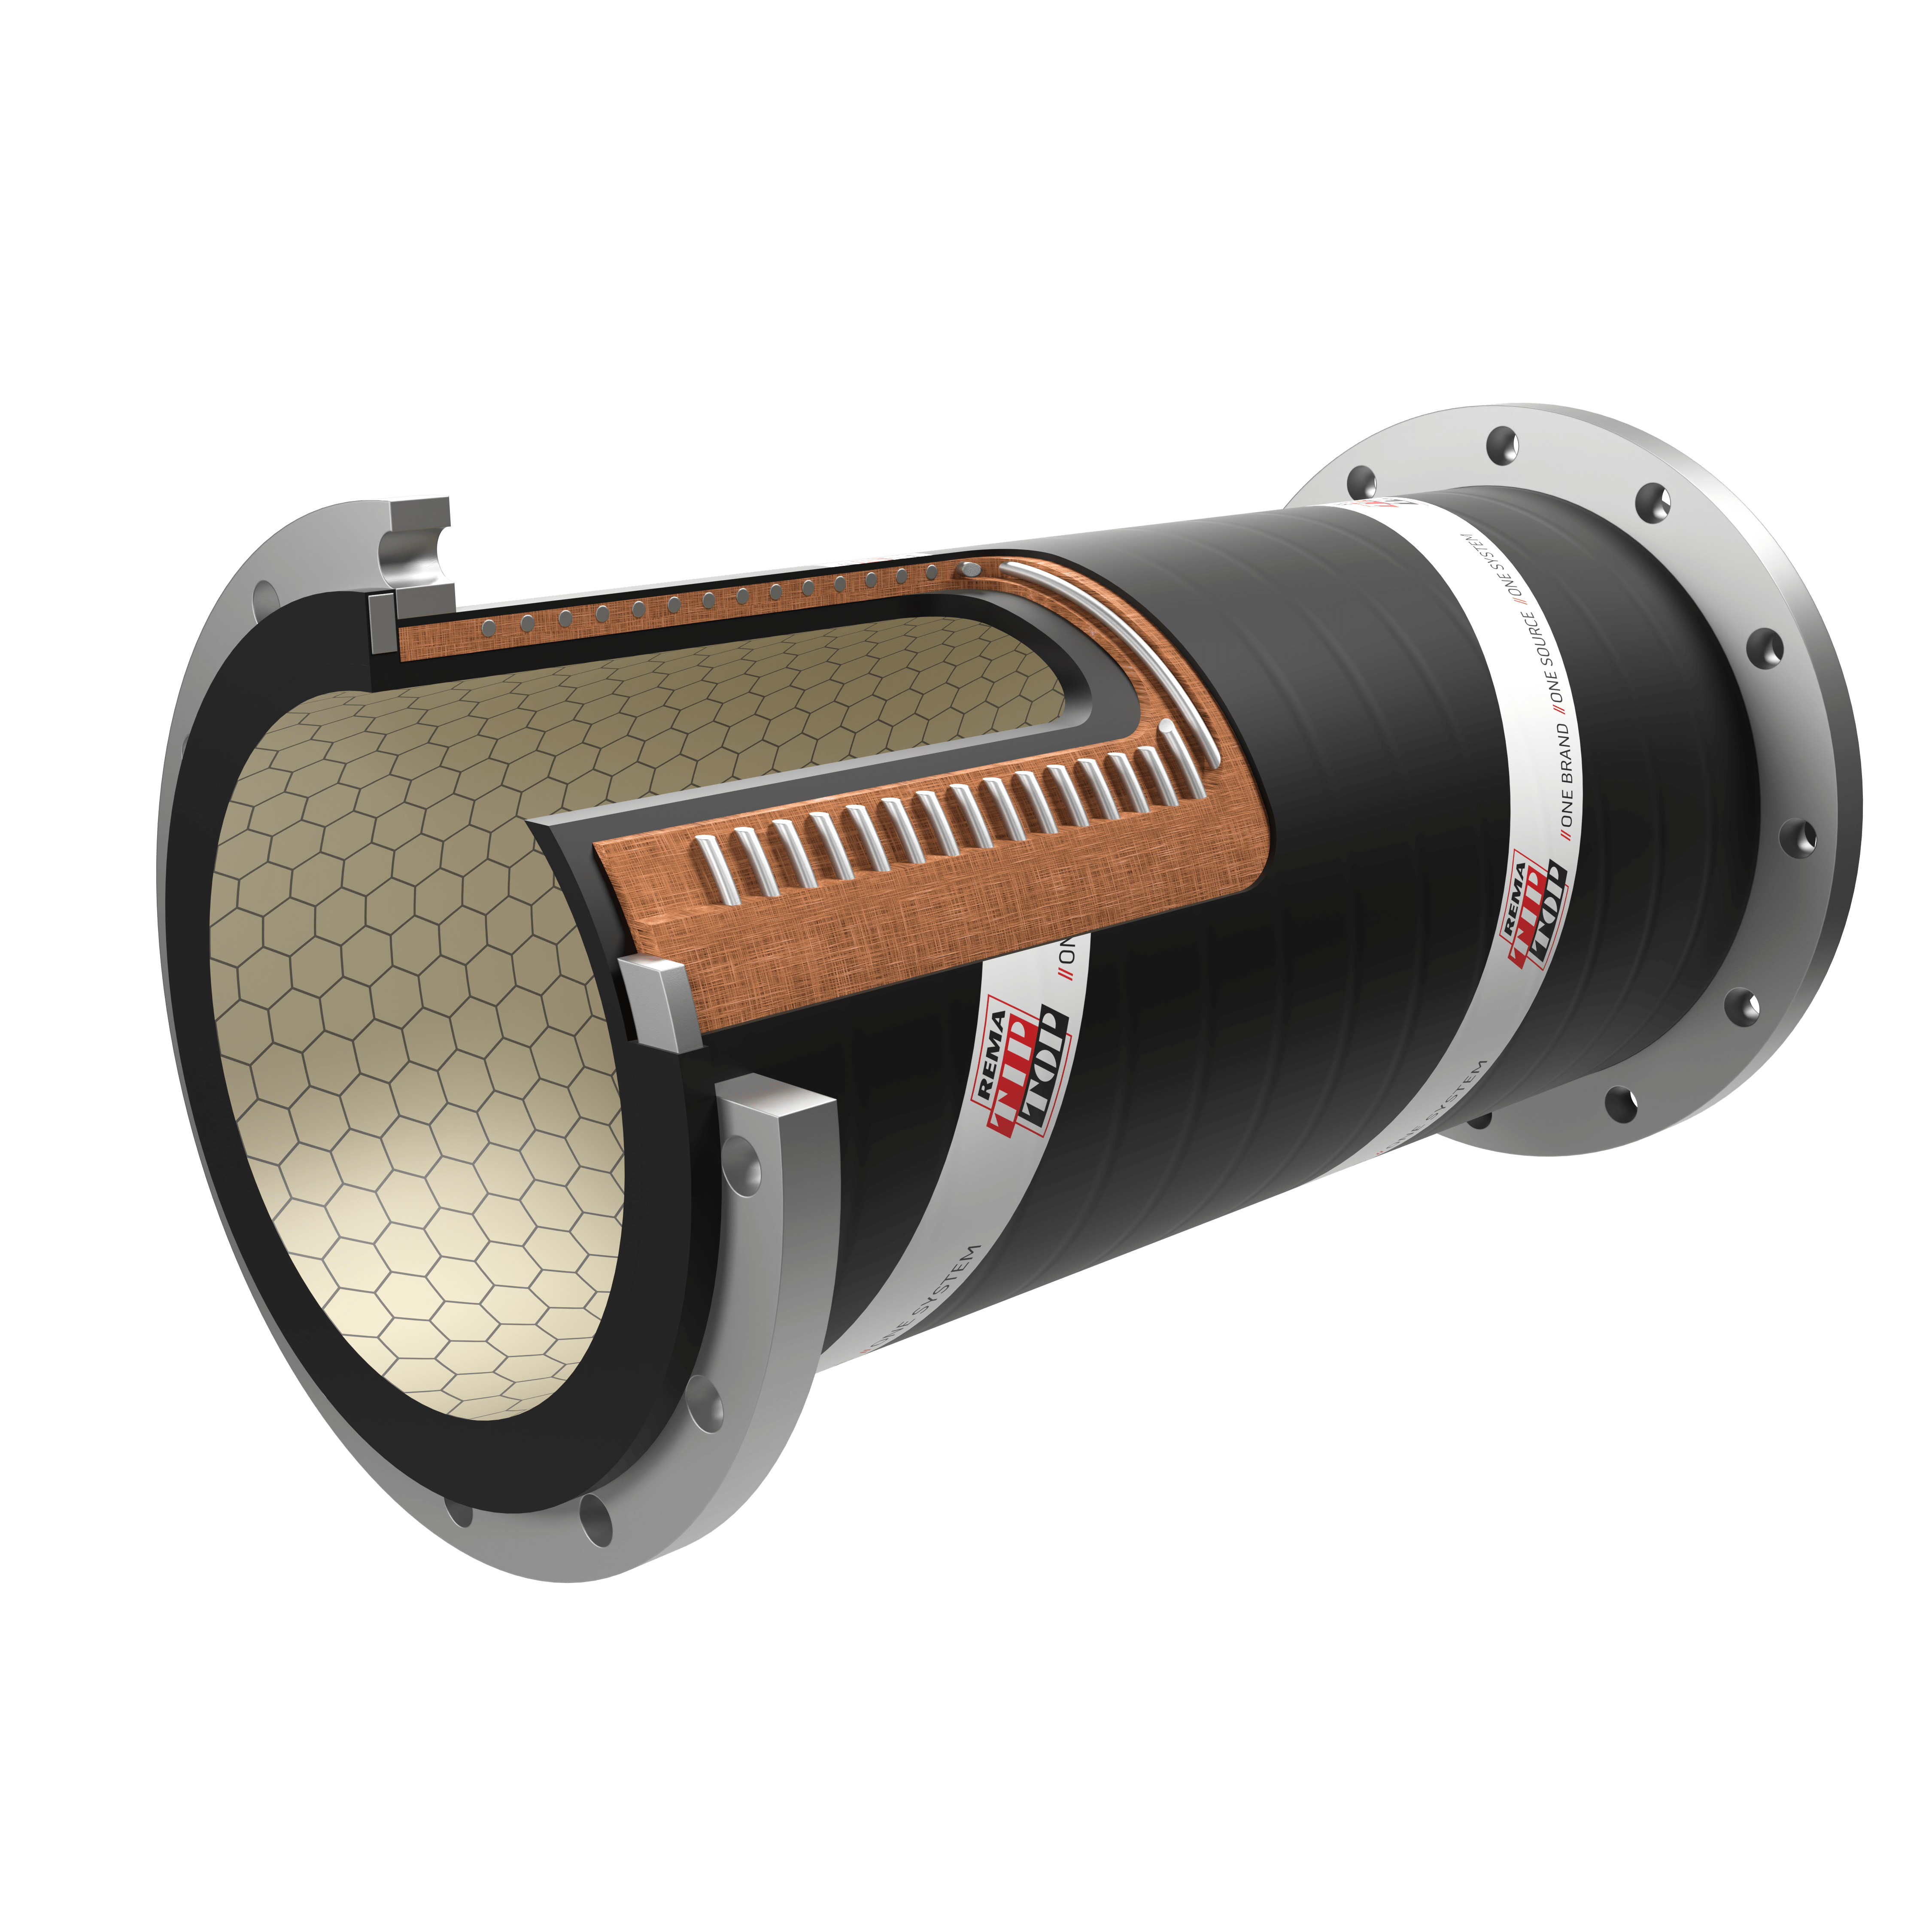 A cross-sectional view of a cylindrical, multi-layer industrial pipe with hexagonal inner lining, insulation layers, and metal flanges at both ends, resembling the design of a Ceramic Hard-Wall Suction & Delivery Hose.